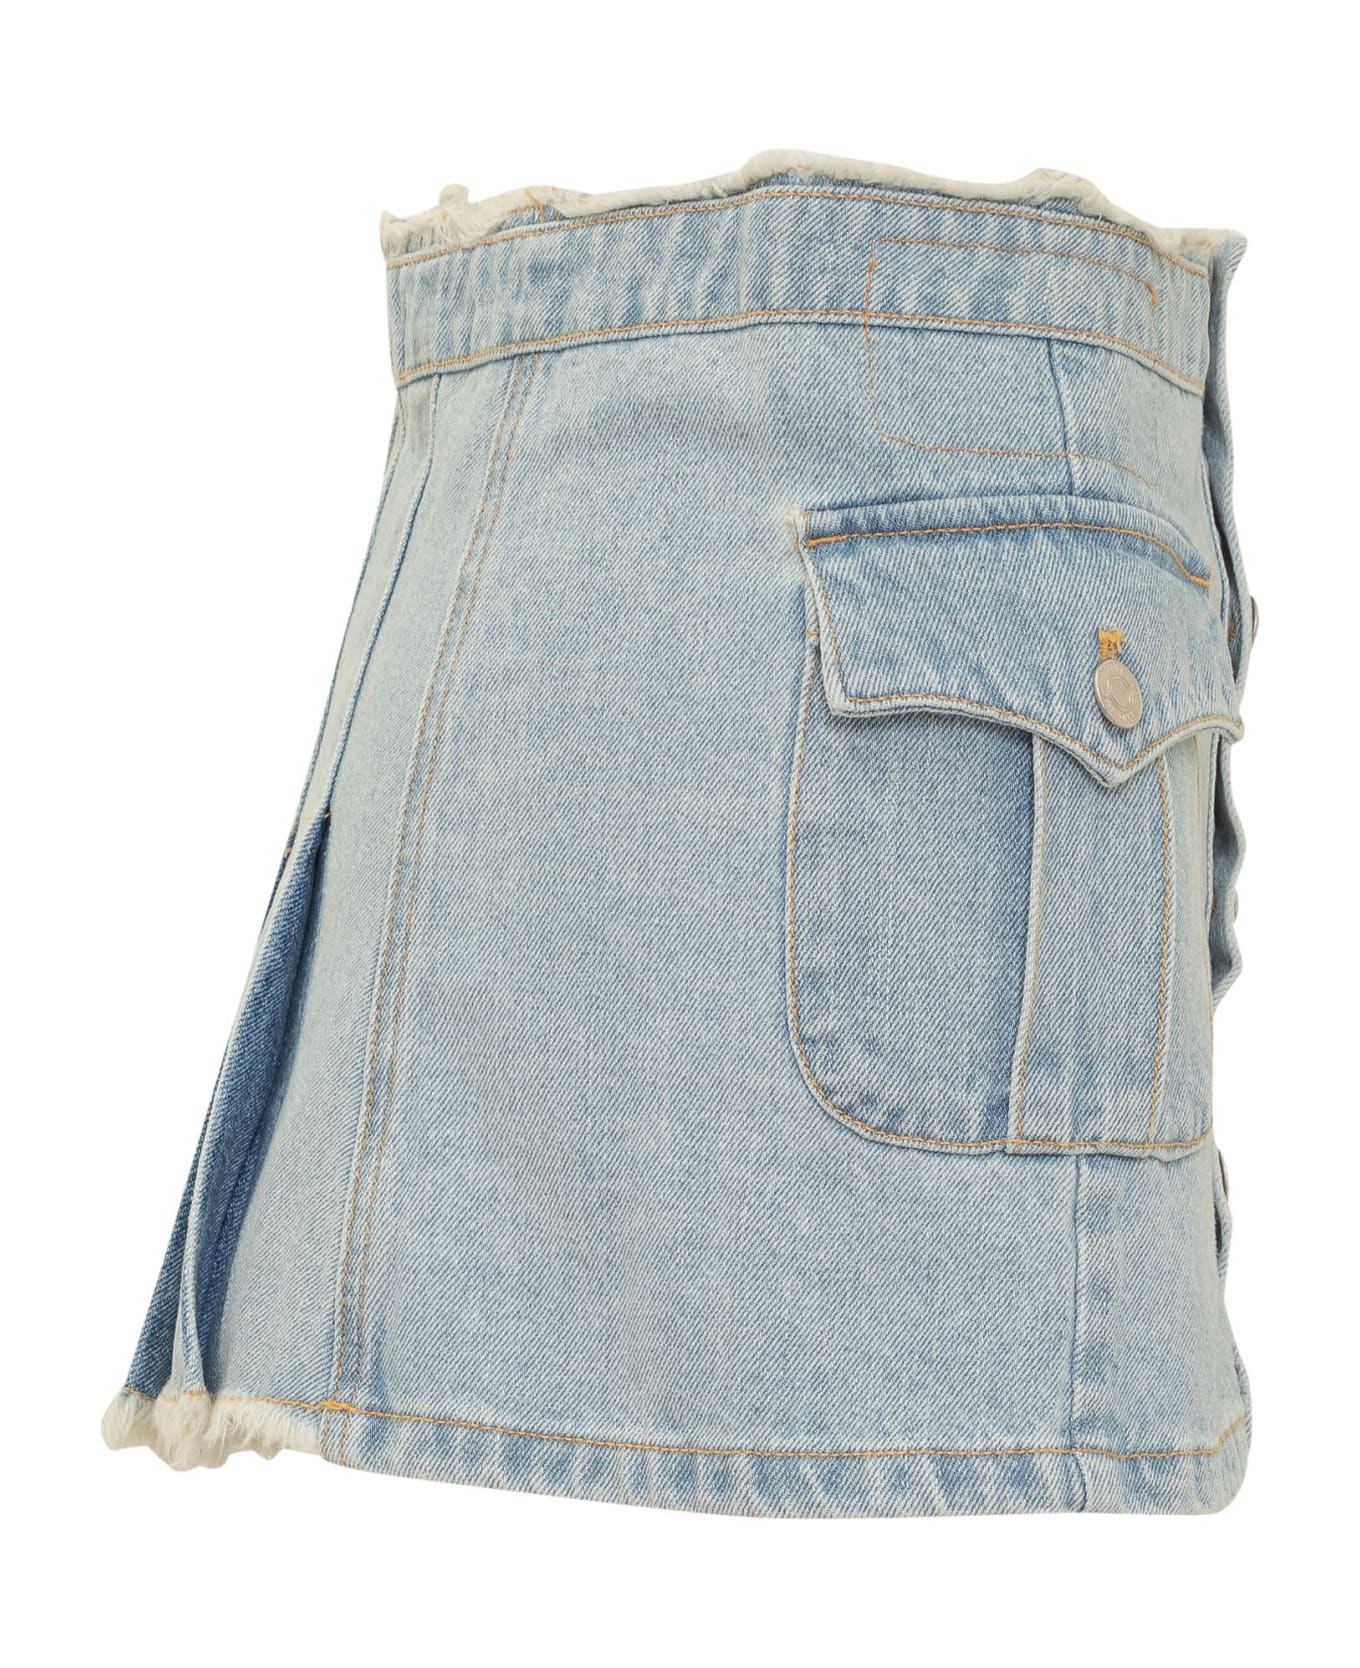 Andersson Bell Apron Mini Skirt - WASHED BLUE スカート